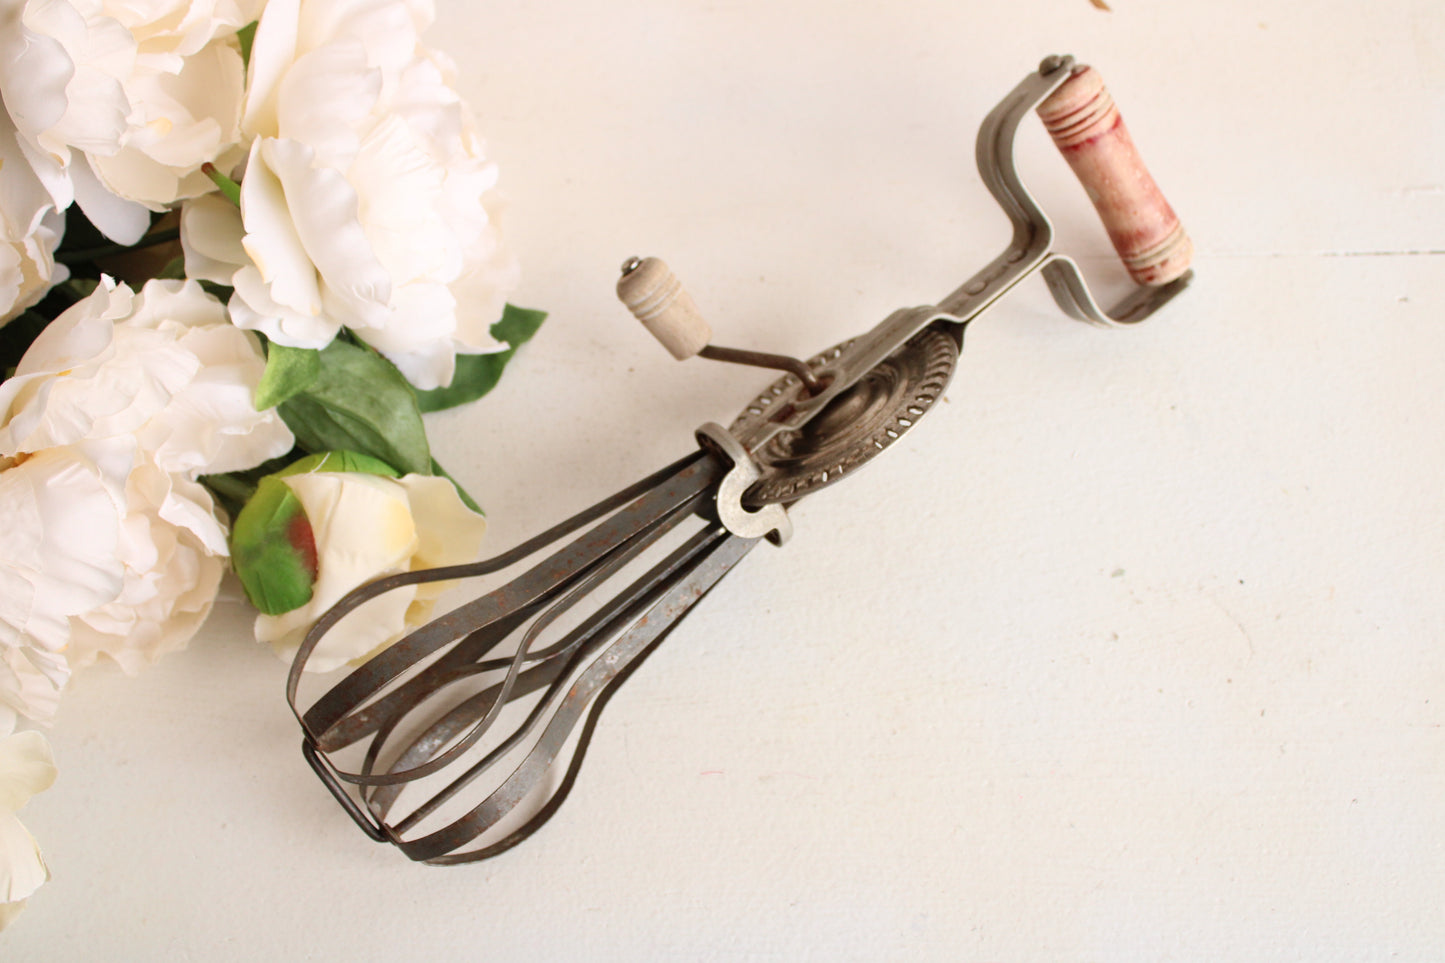 Vintage 1930s Androck Red Handle Hand Mixer